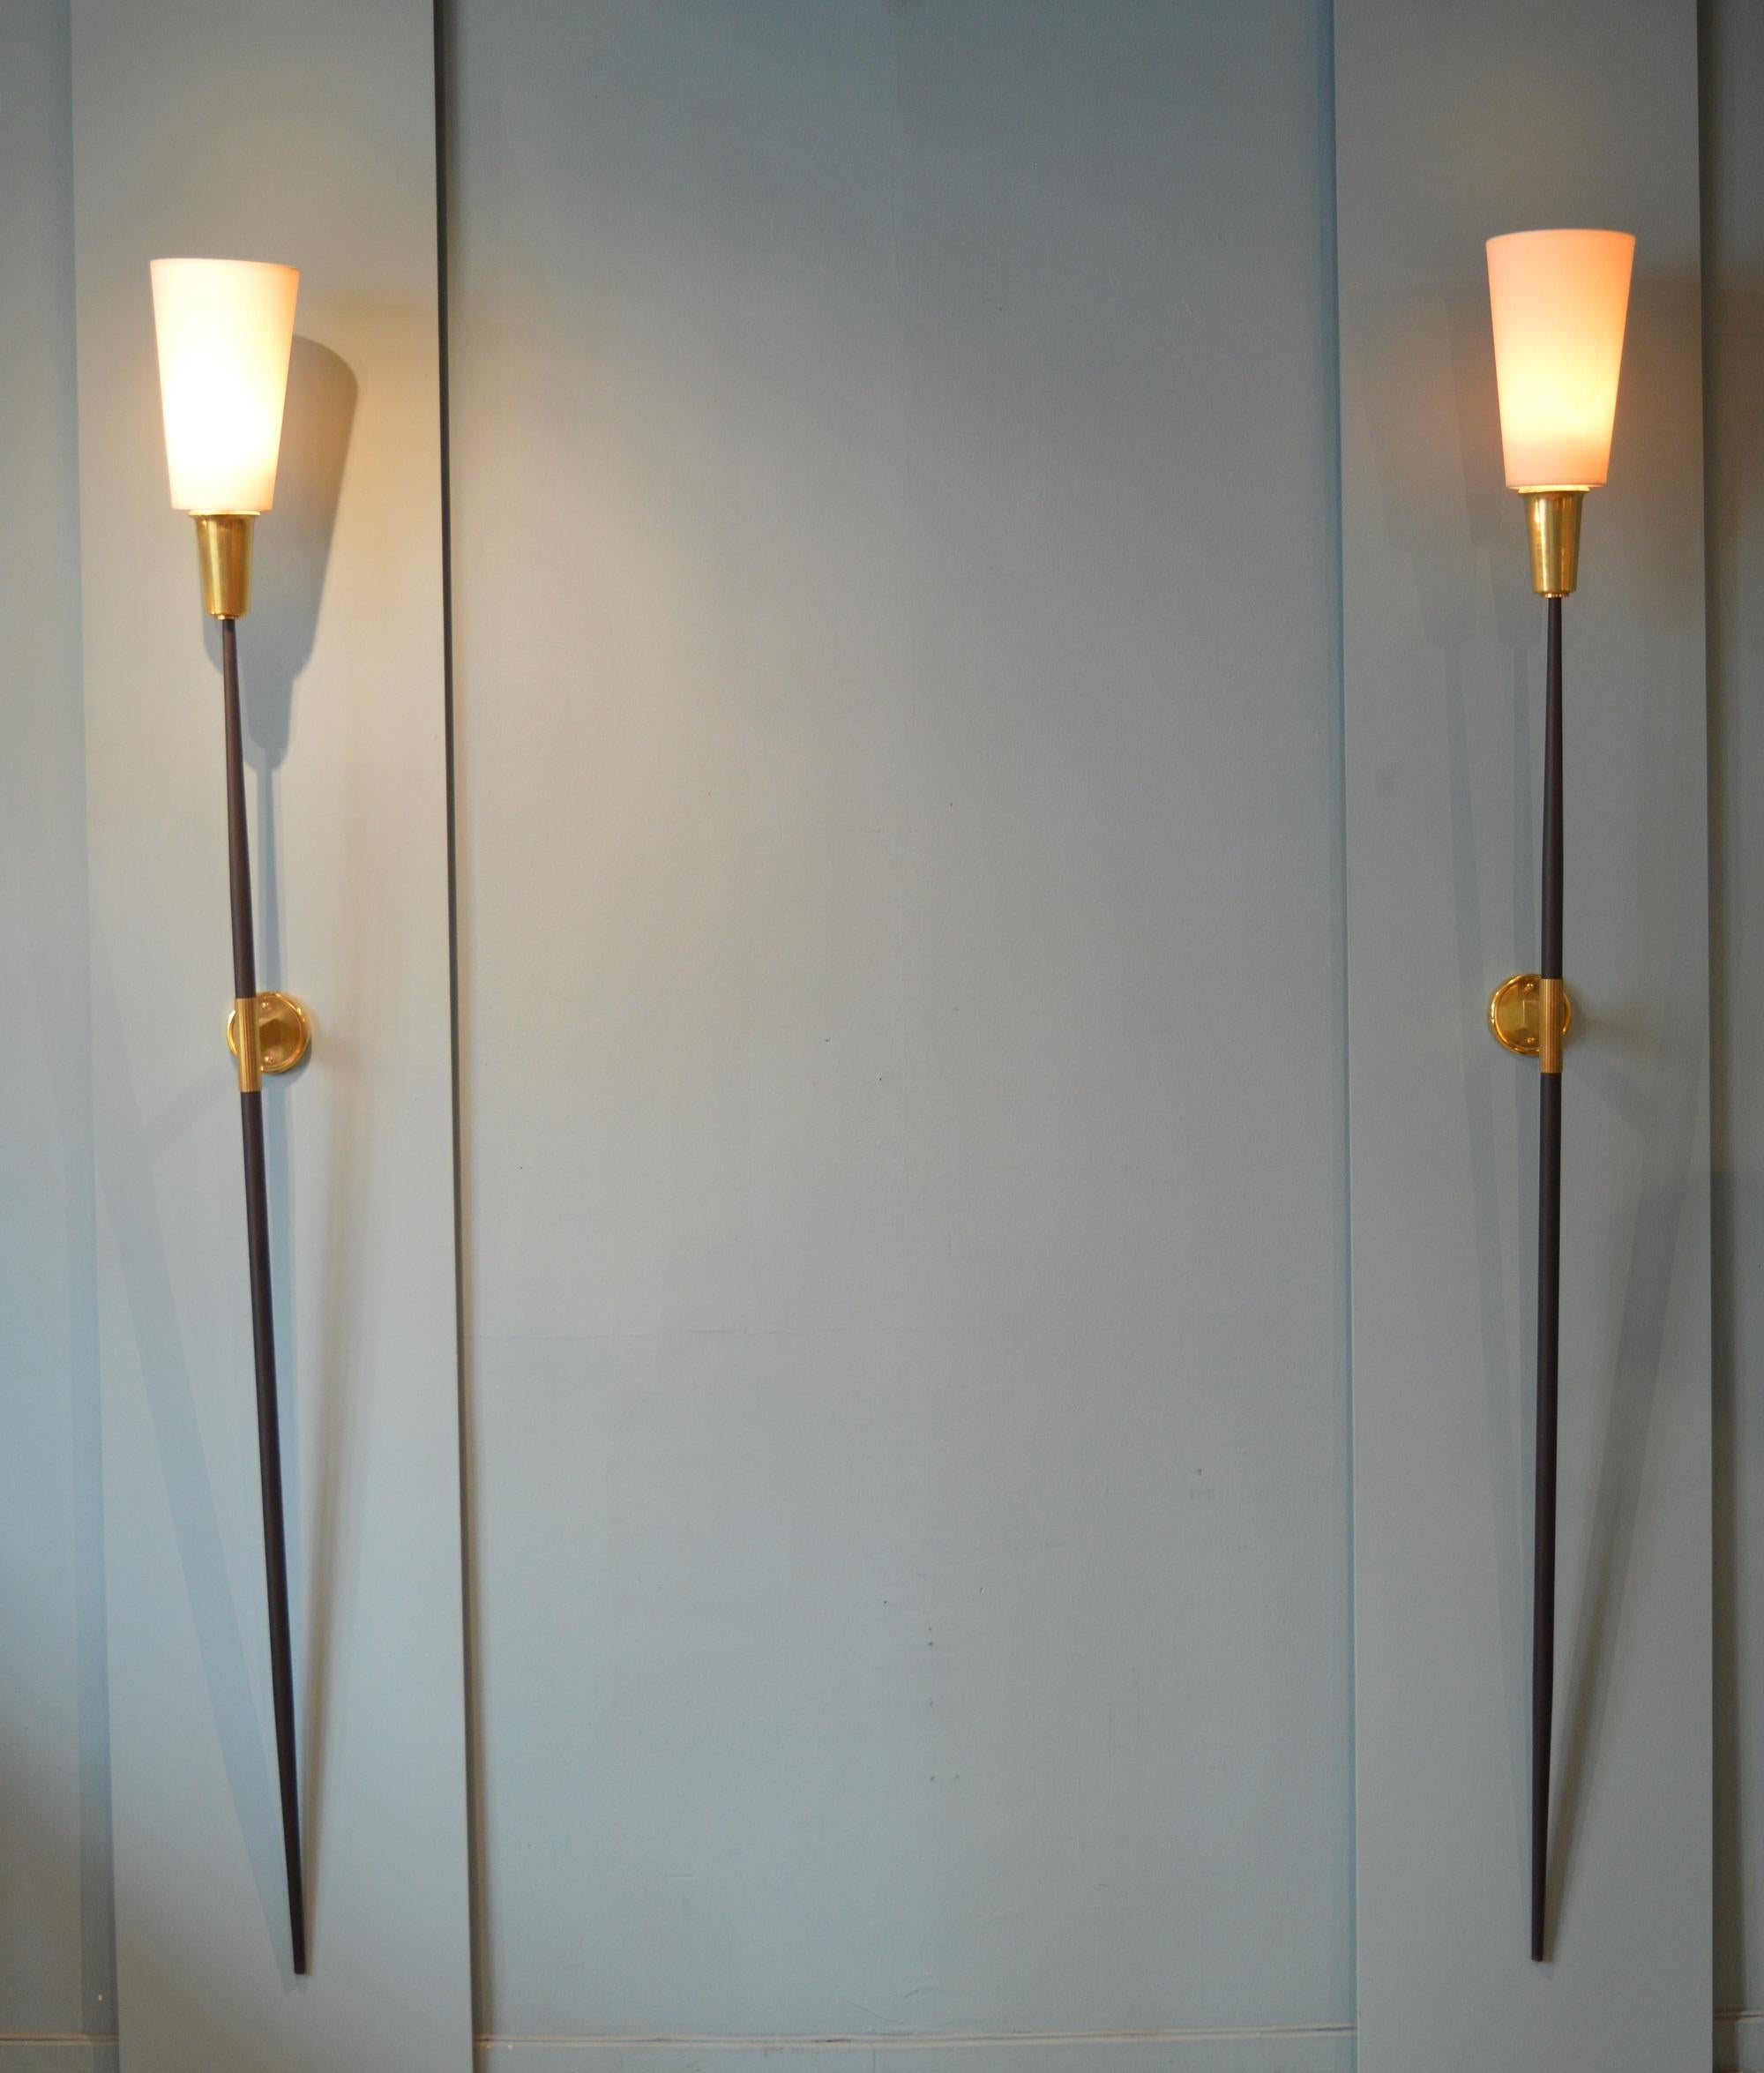 Very elegant pair of sconces torcheres by Maison Arlus.
Brass and lacquered metal.
French work circa 1960.
Lampshades redone as original.